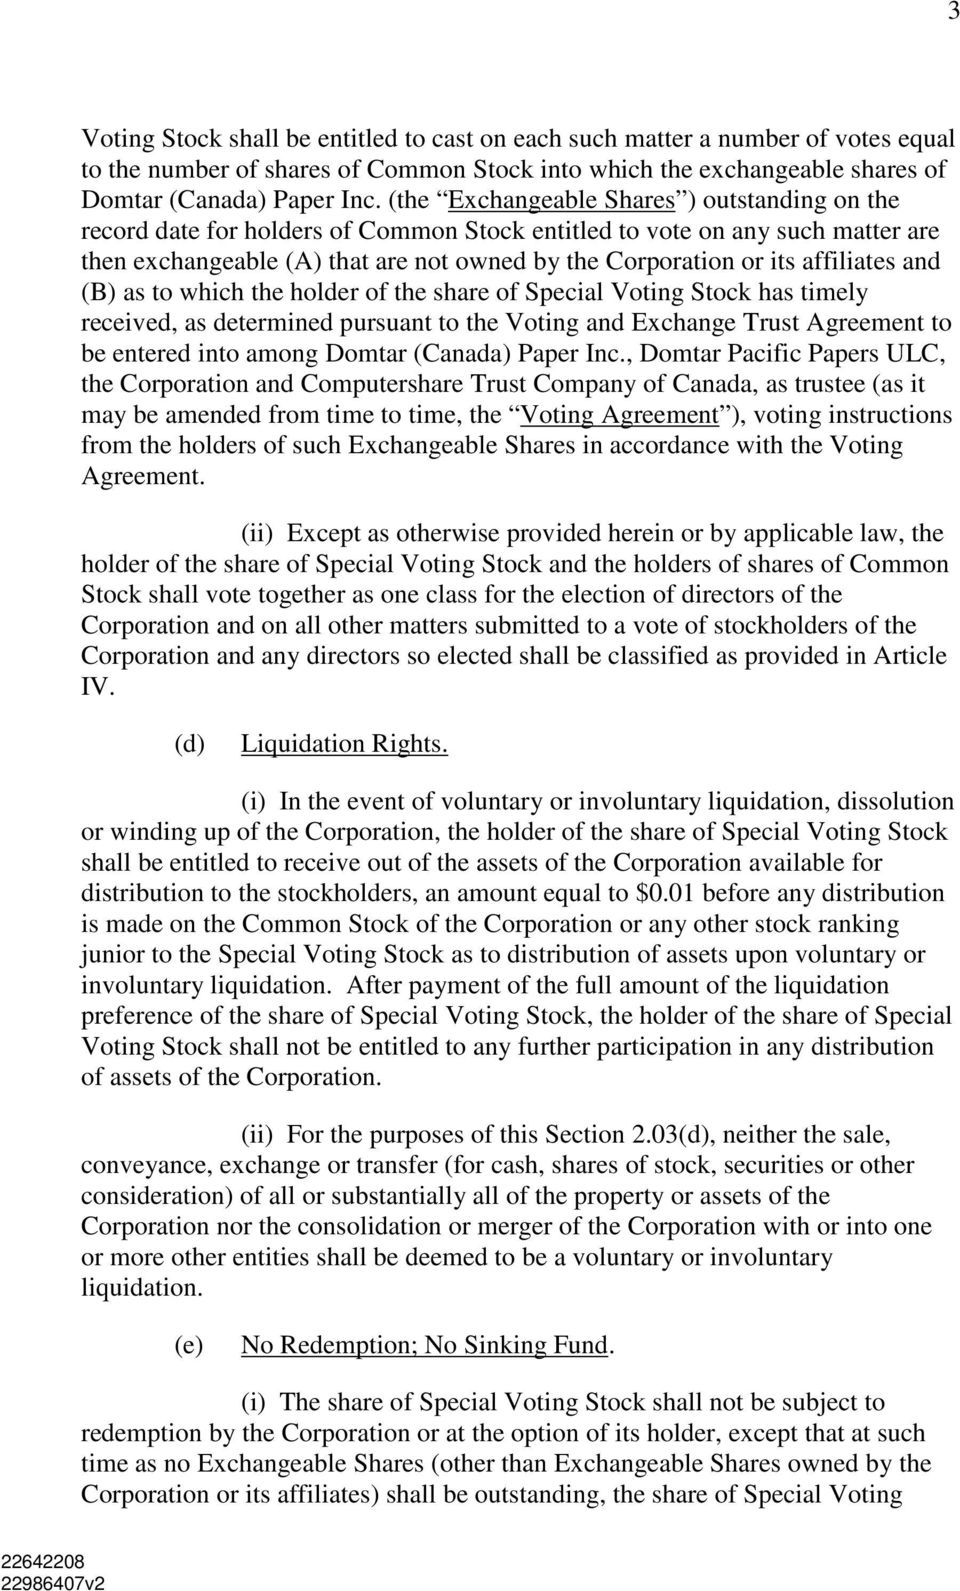 affiliates and (B) as to which the holder of the share of Special Voting Stock has timely received, as determined pursuant to the Voting and Exchange Trust Agreement to be entered into among Domtar